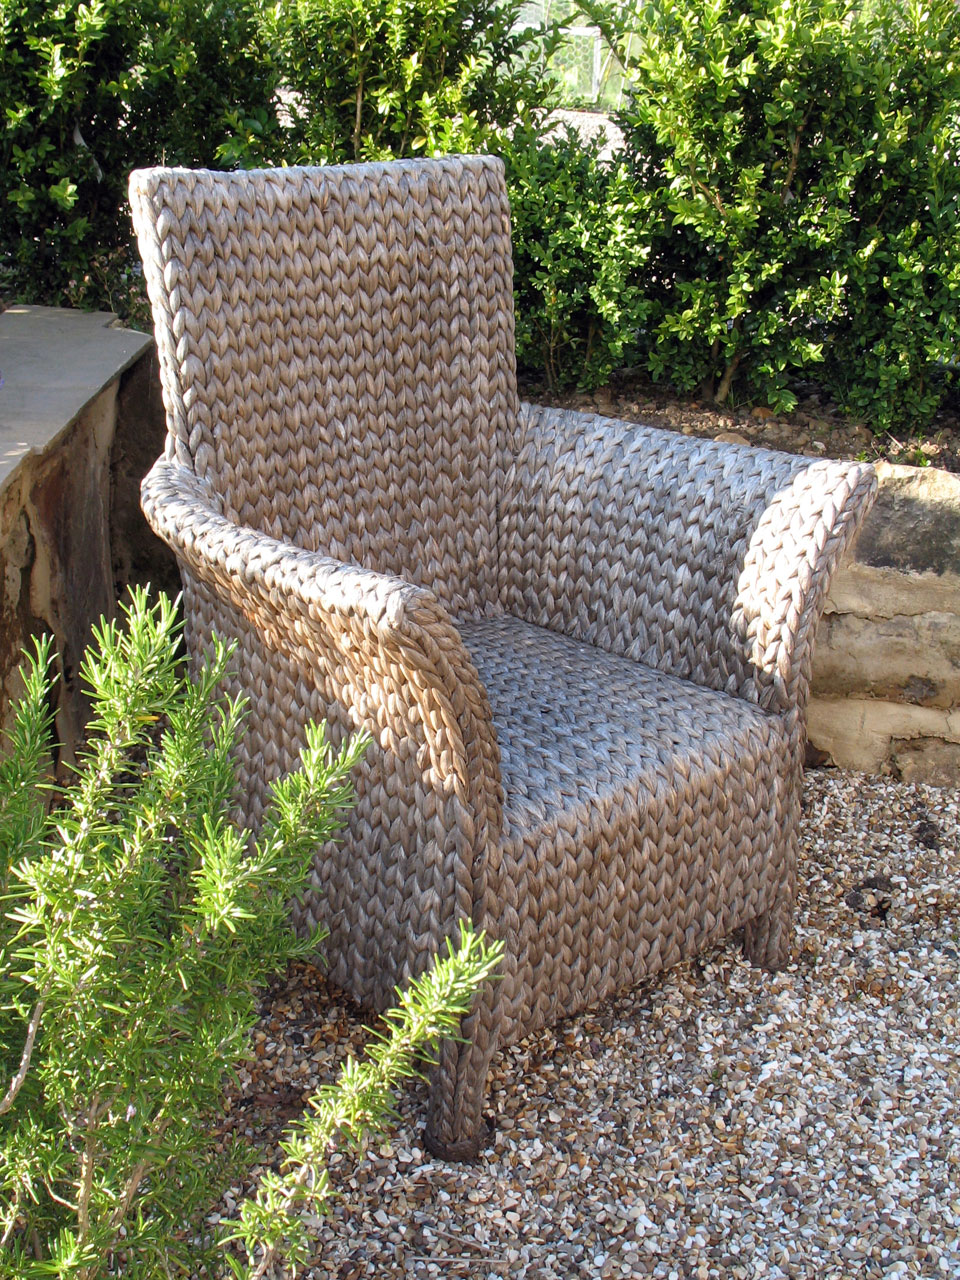 A basket chair on the garden